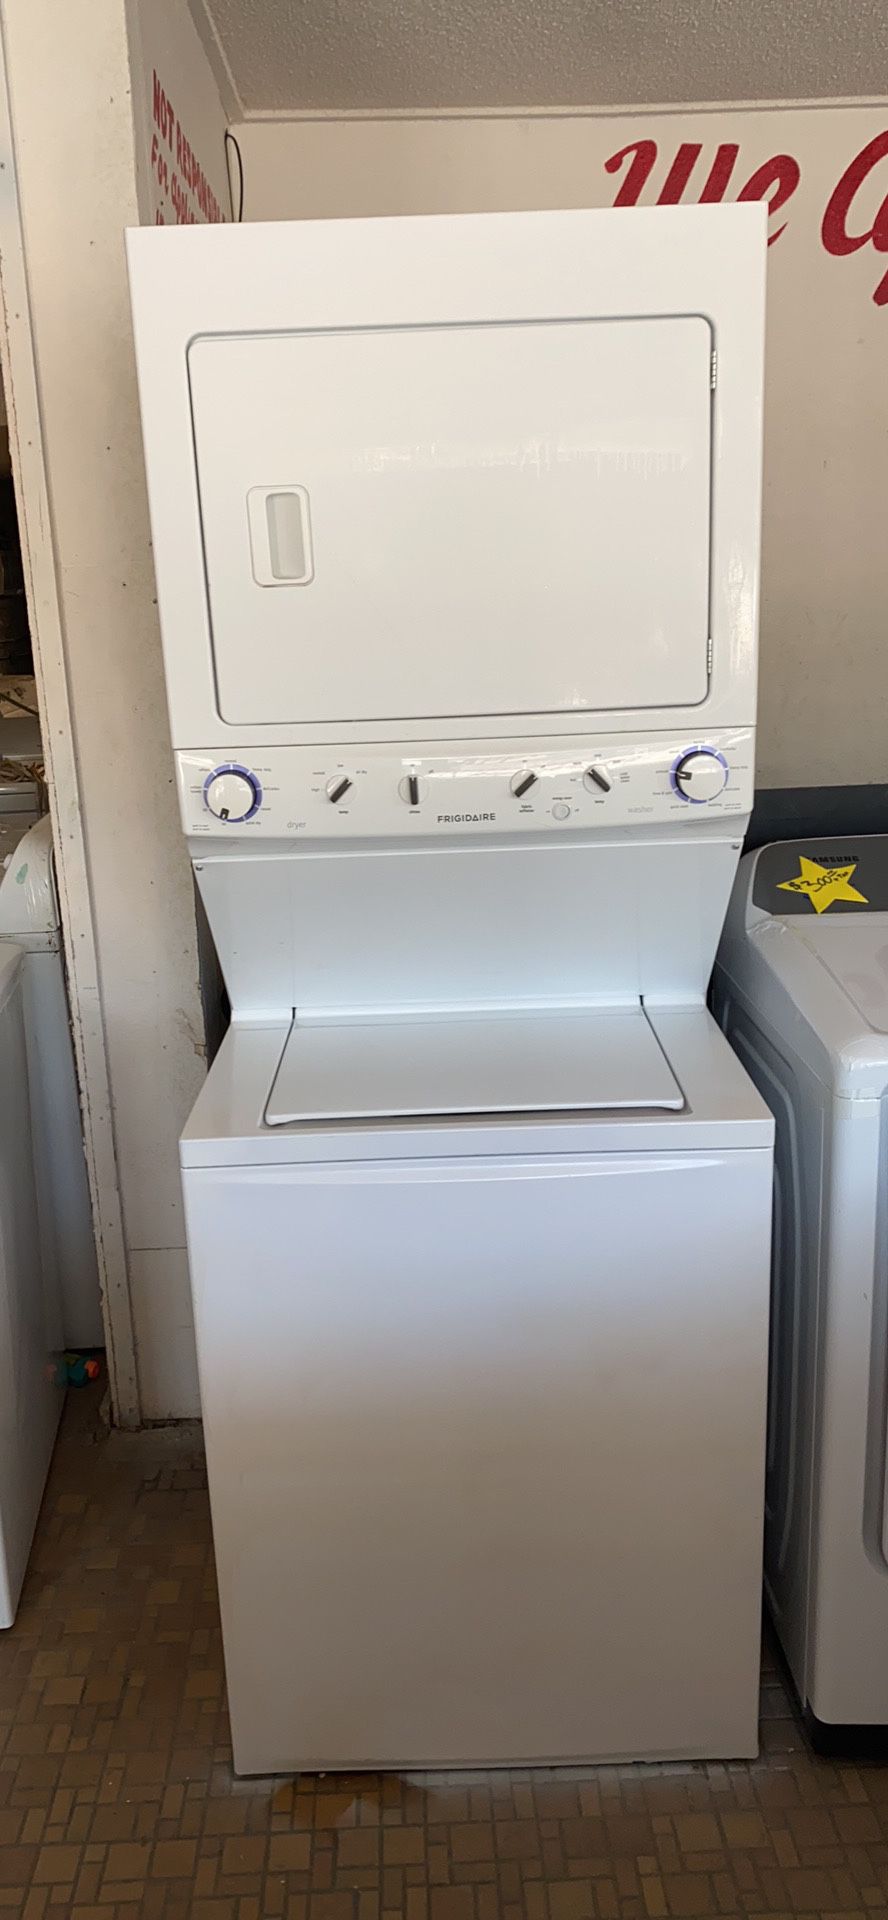 GE STACKABLE WASHER DRYER COMBO 1 year warranty